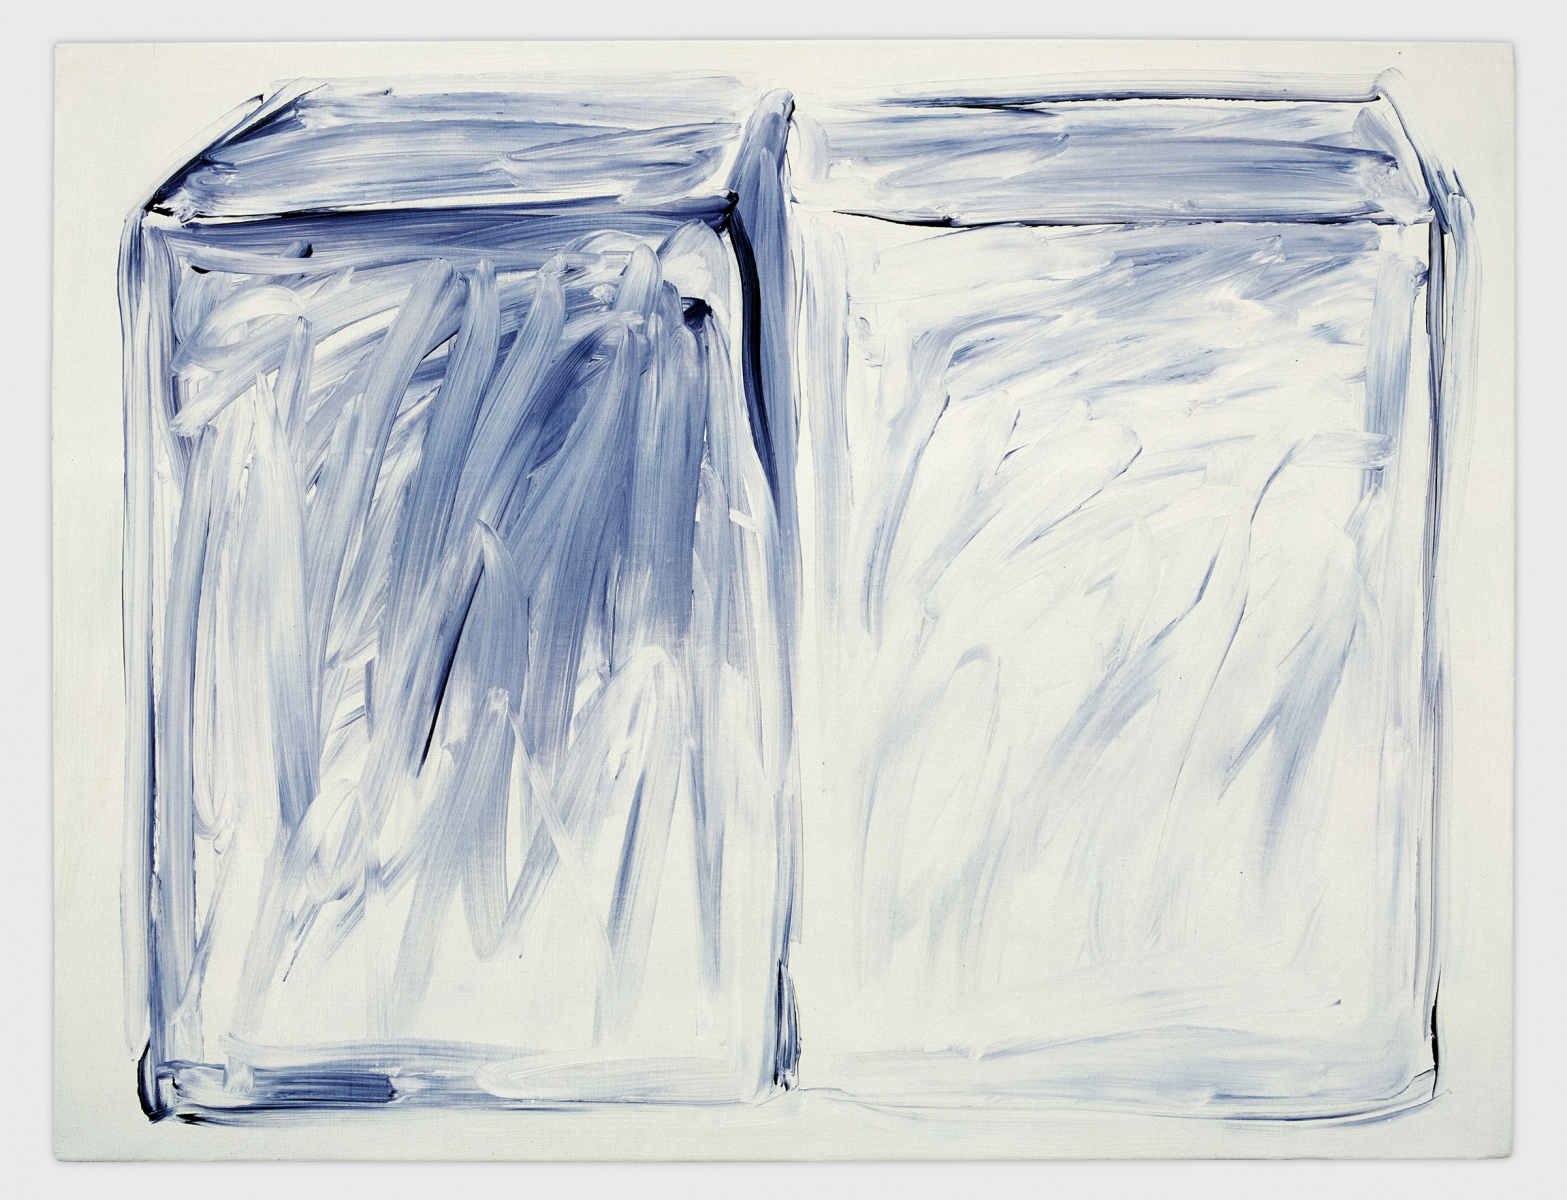 Untitled, 1985, Oil on Canvas, 72.7x90.9cm